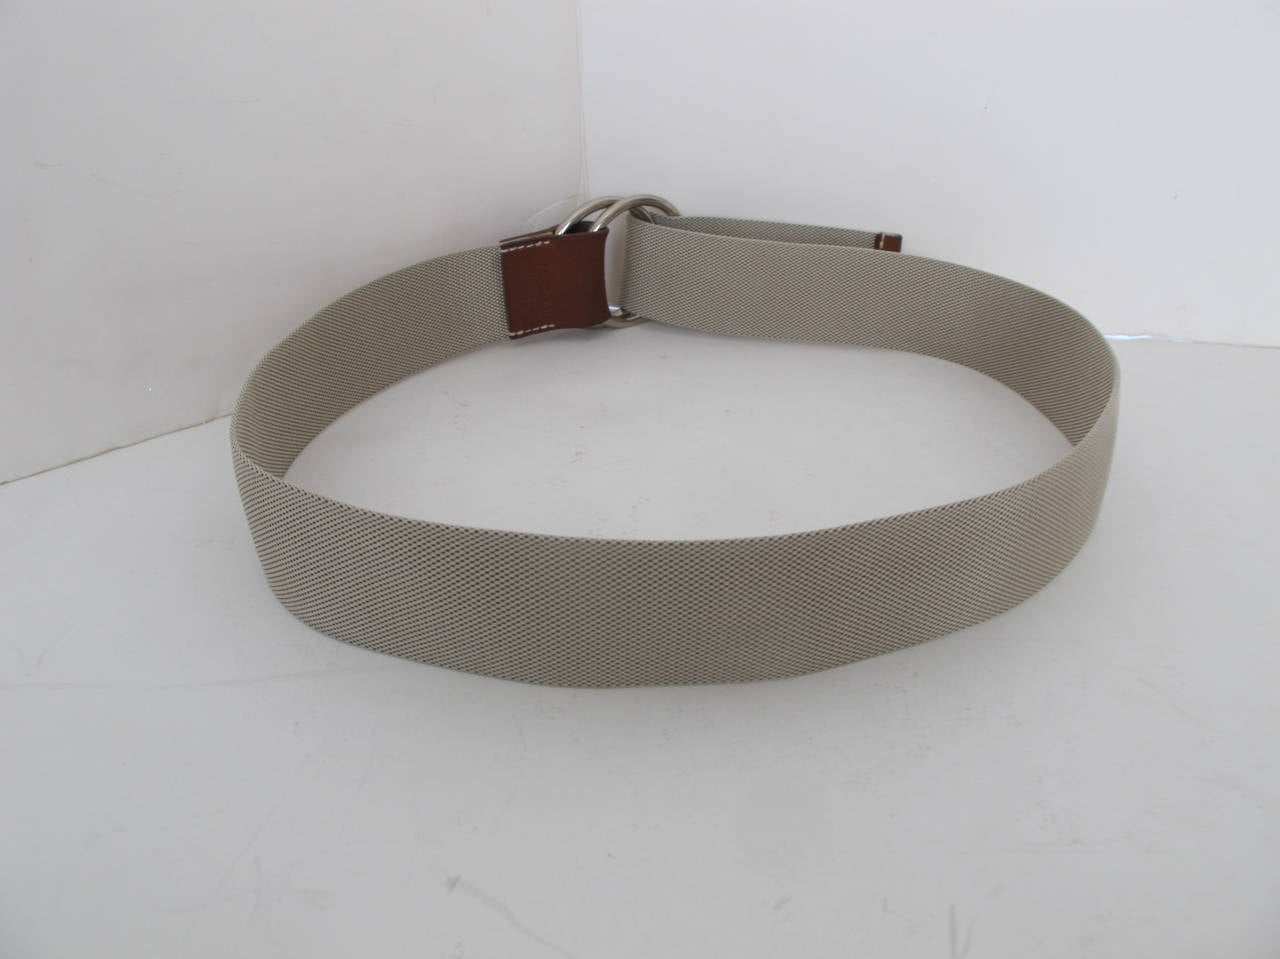 Hermes Rare Belt with Silver Ring Buckle and Leather Trim 1